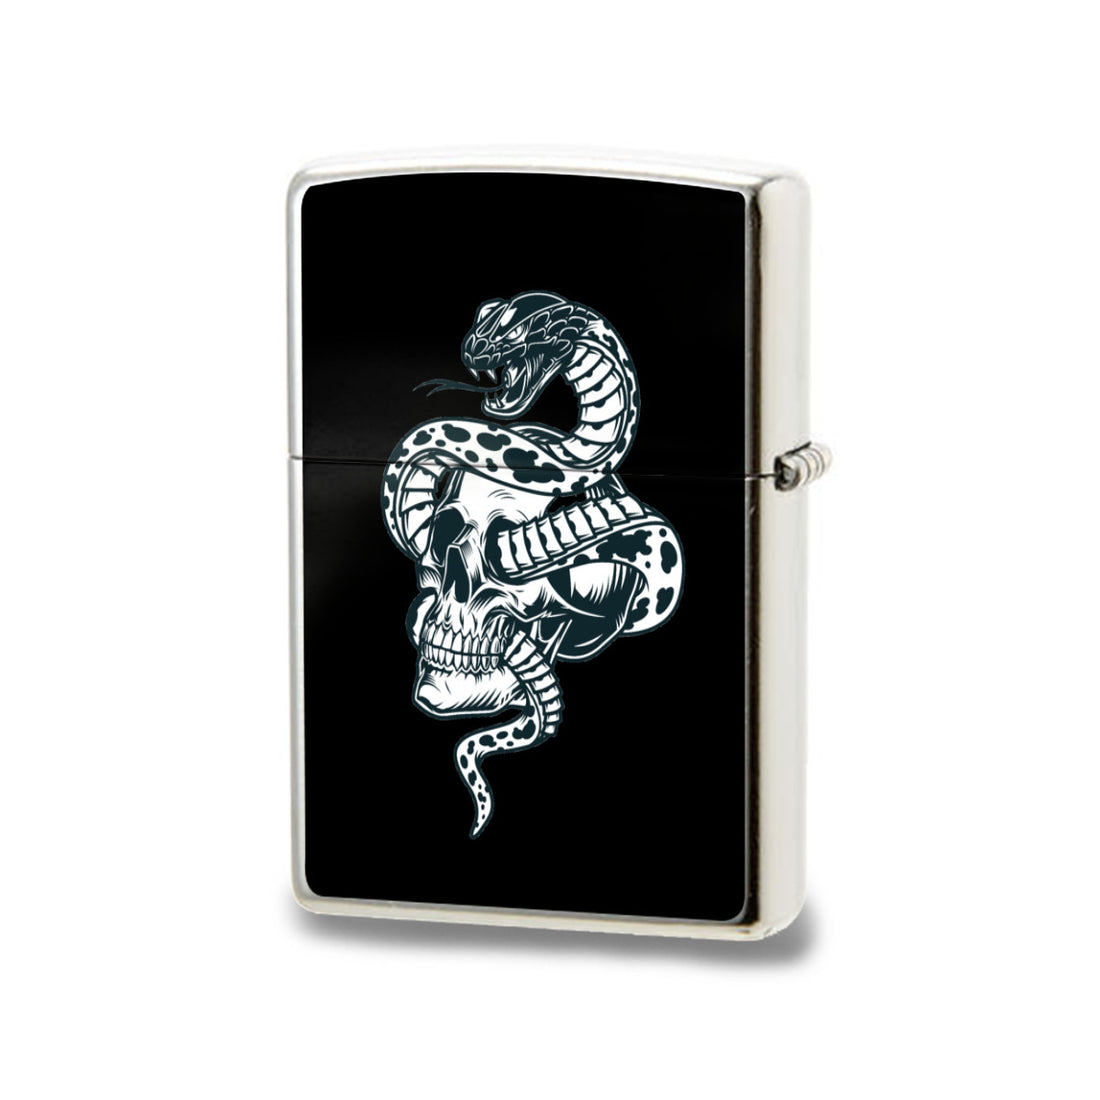 Skull and Snake Lighter Case｜ High quality aluminum Home-clothes-jewelry